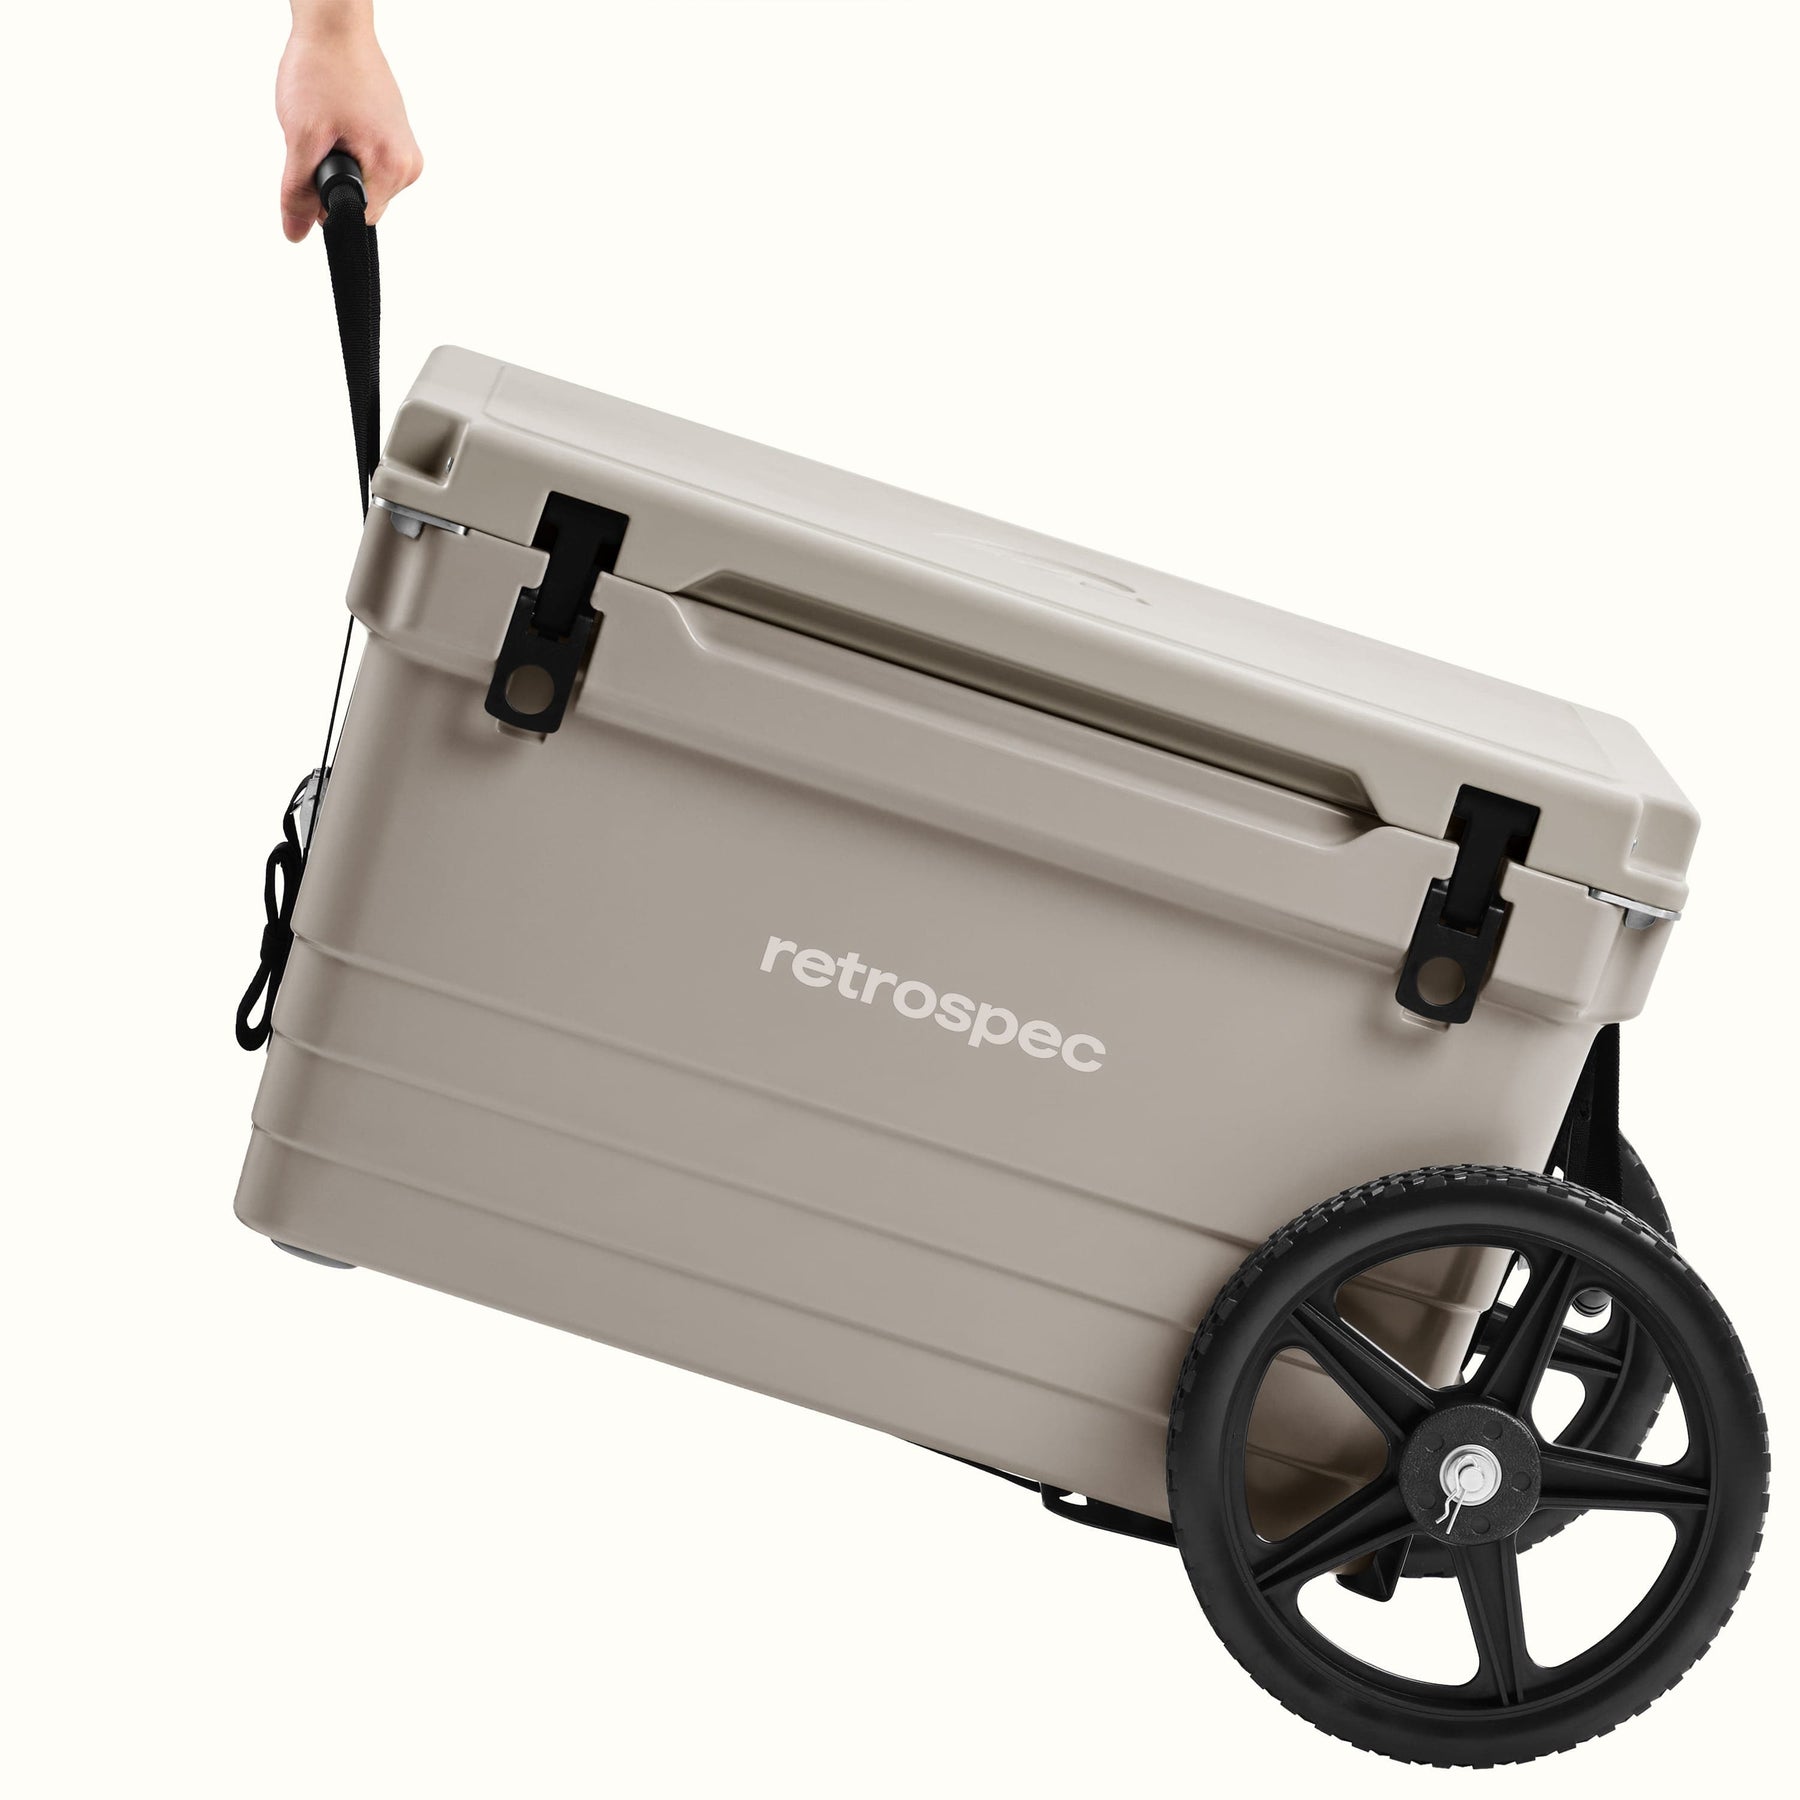  FERUERW Upgraded Cooler Wheel Kit, Universal Cooler Cart Kit  for Heavy-Duty Coolers,15.5 in to 17.5 in Wide Coolers, All Terrain 12 Inch  Wheels&Ratchet Straps, Roller Accessories for Camping & Beach 